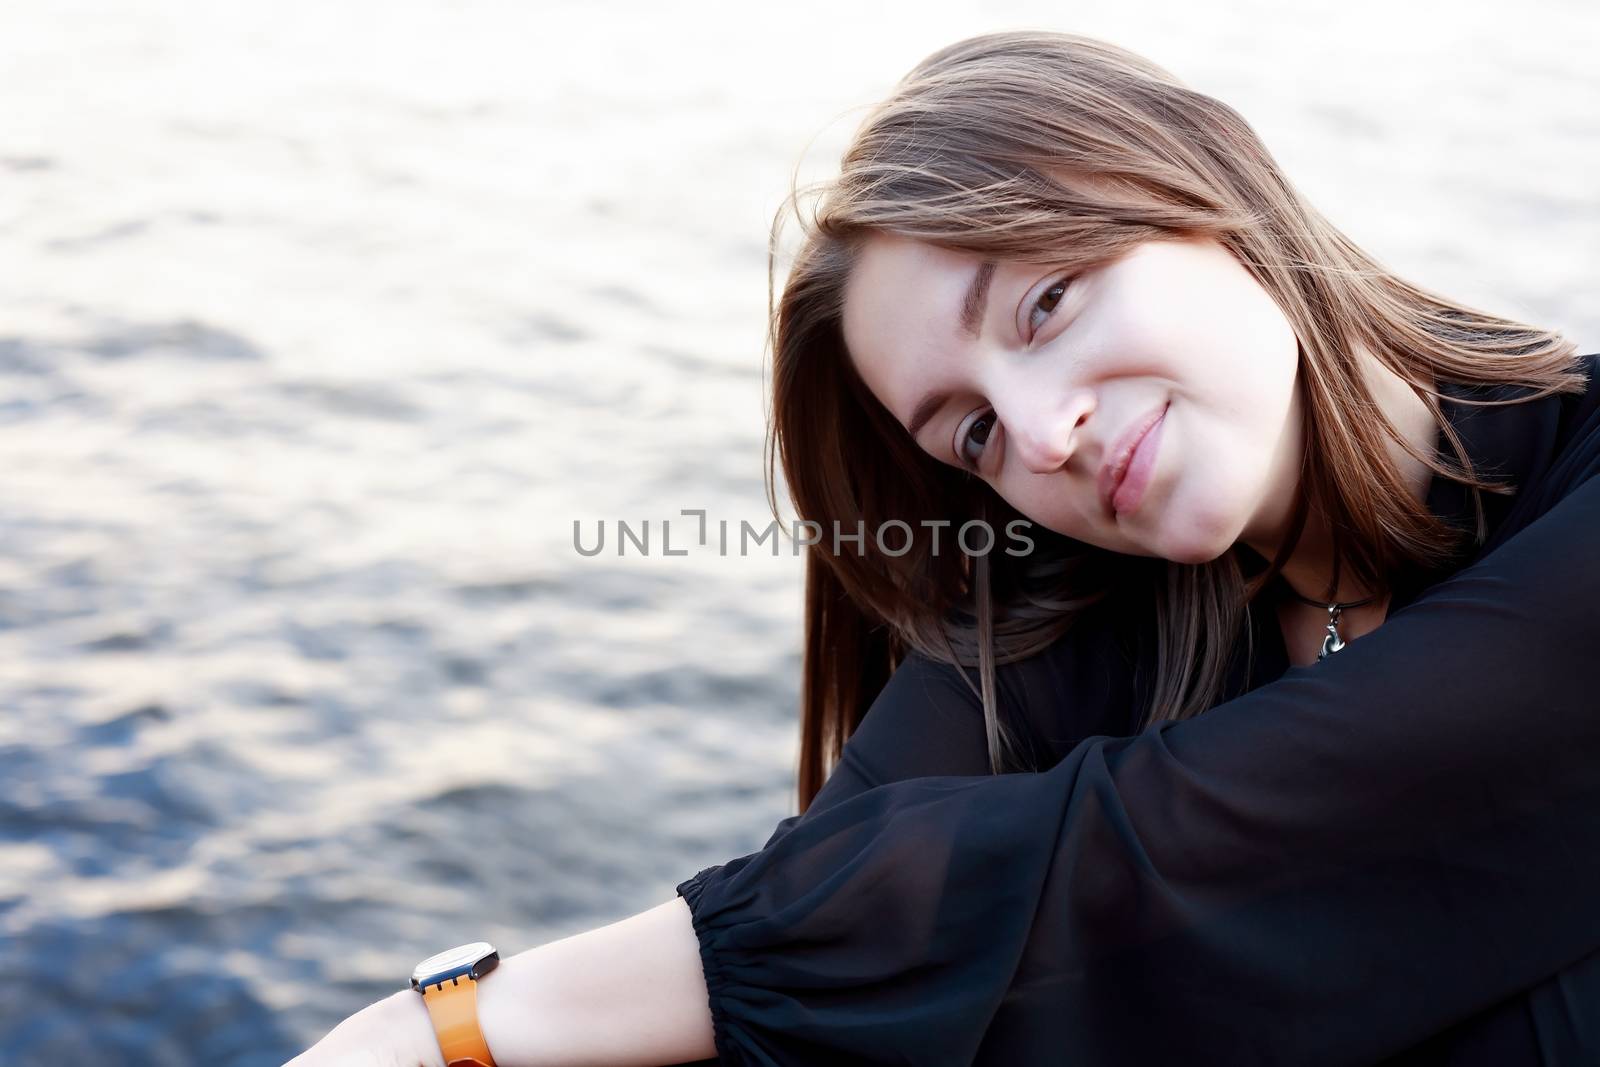 Beautiful young woman portrait against water background